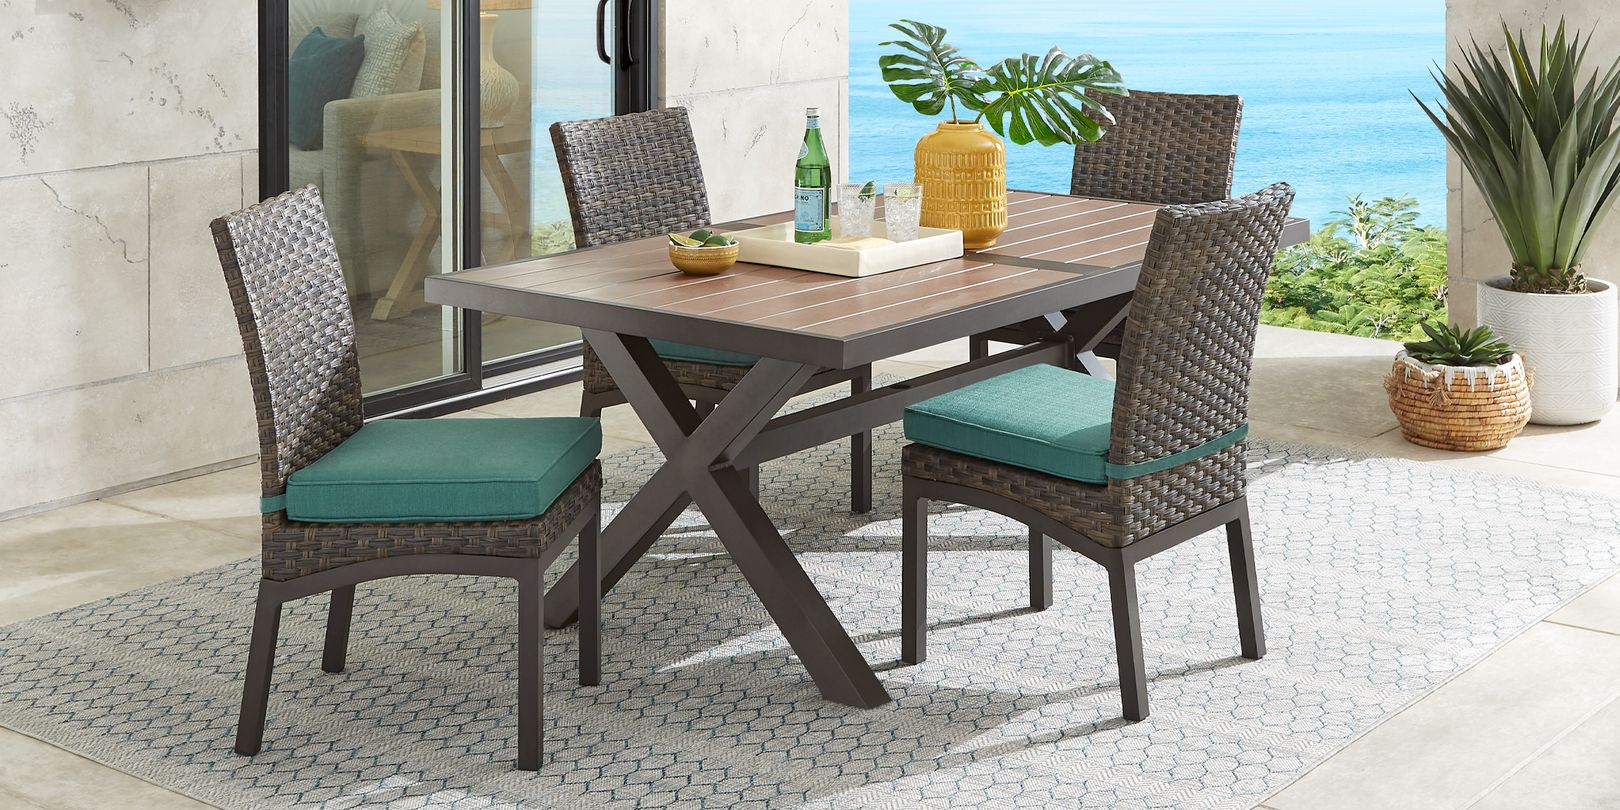 Photo of brown patio dining set with plants on the table and in the background